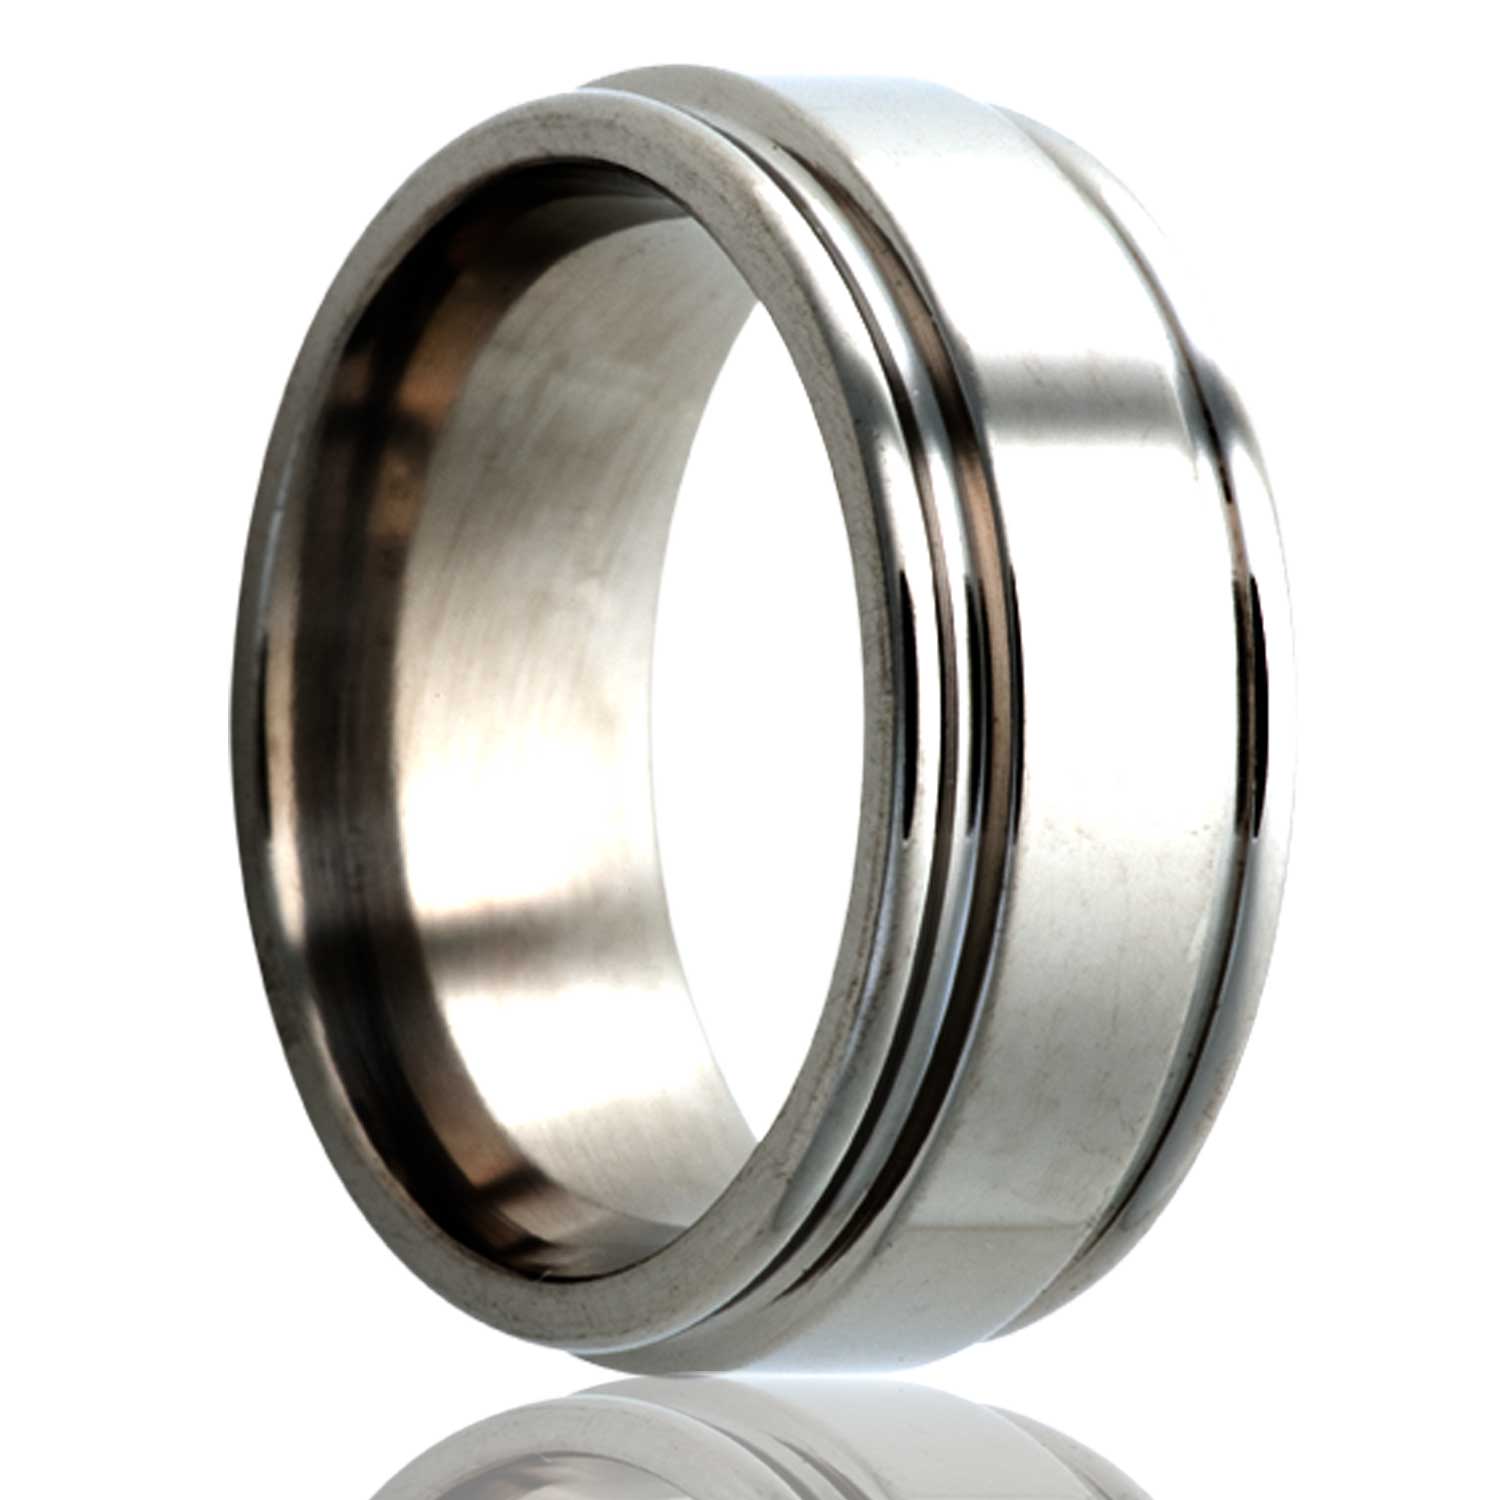 A titanium wedding band with grooved edges displayed on a neutral white background.